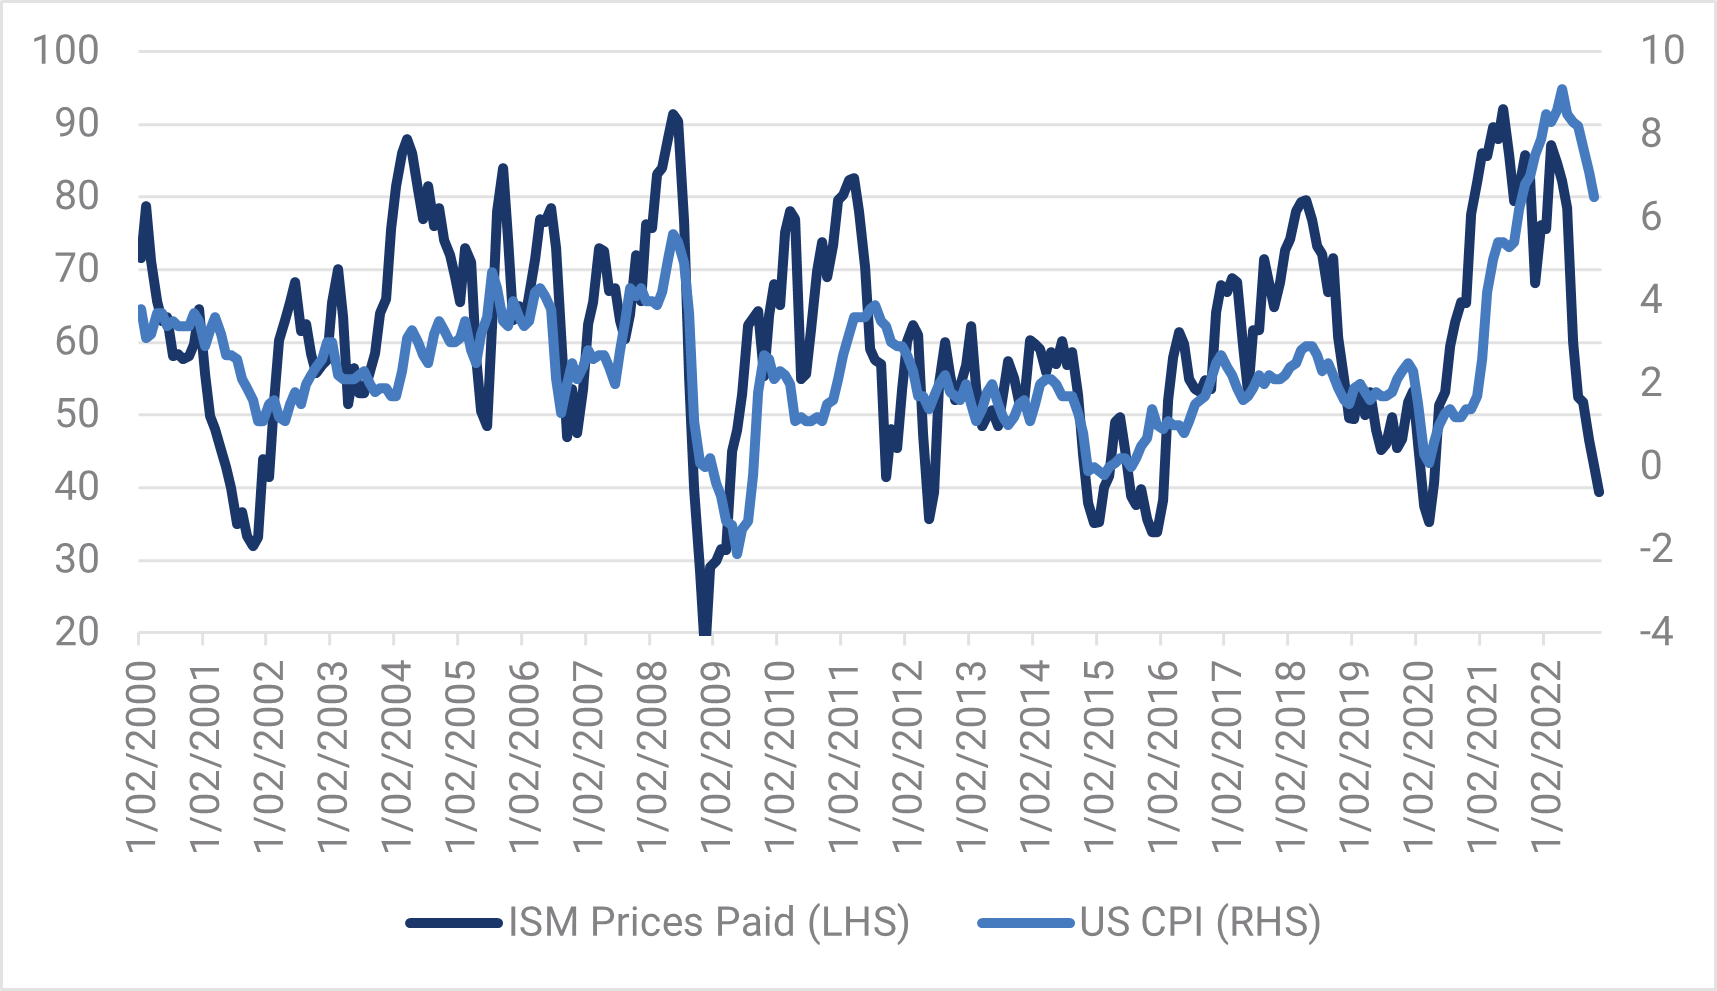 
Chart 4: ISM Prices Paid and US CPI

Source: YarraCM, Bloomberg